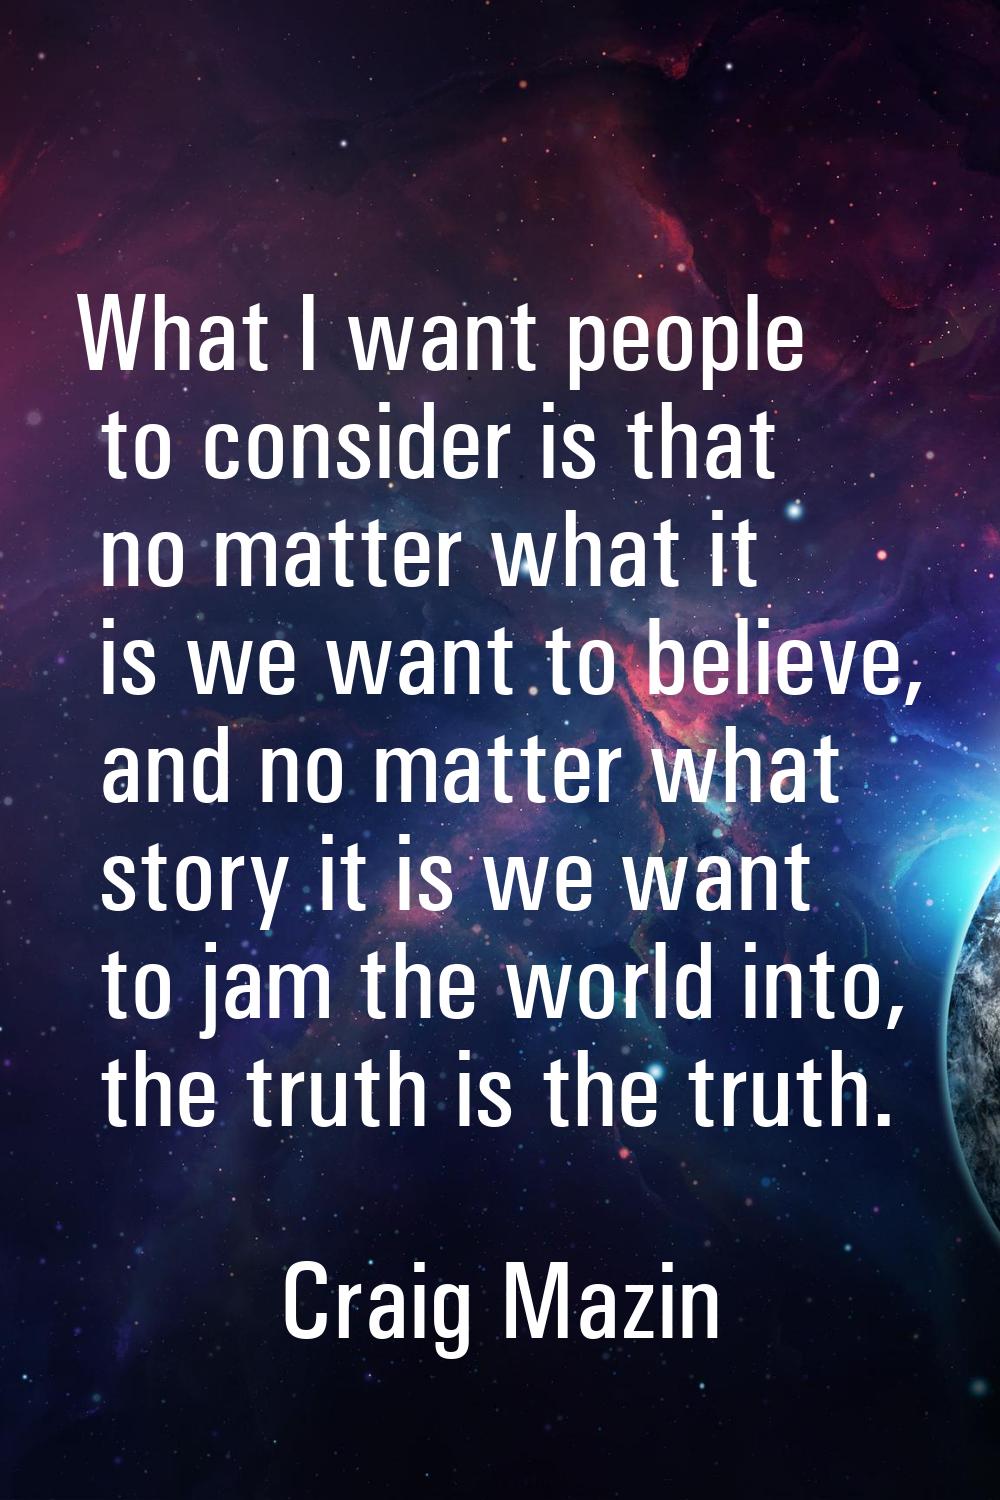 What I want people to consider is that no matter what it is we want to believe, and no matter what 